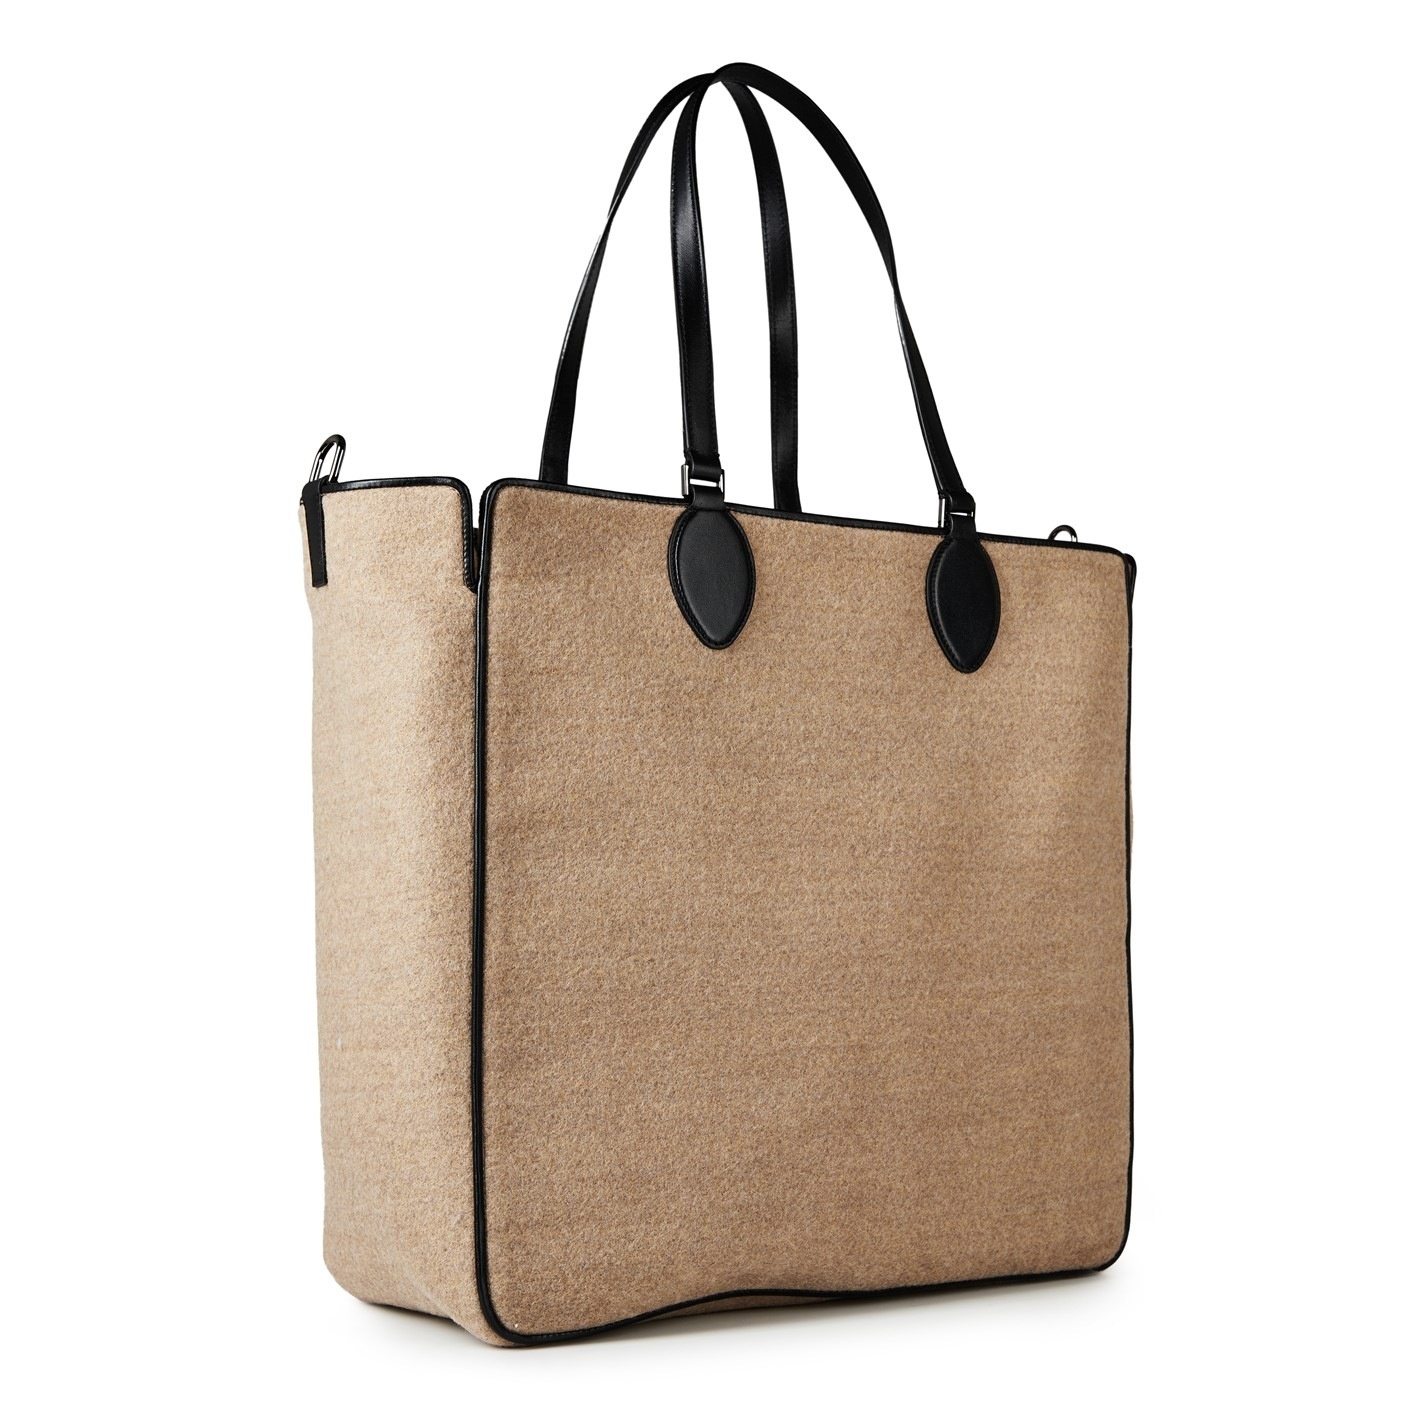 TOILE ICONOGRAPHE SHOPPING BAG IN WOOL WITH LEATHER DETAILS - 3